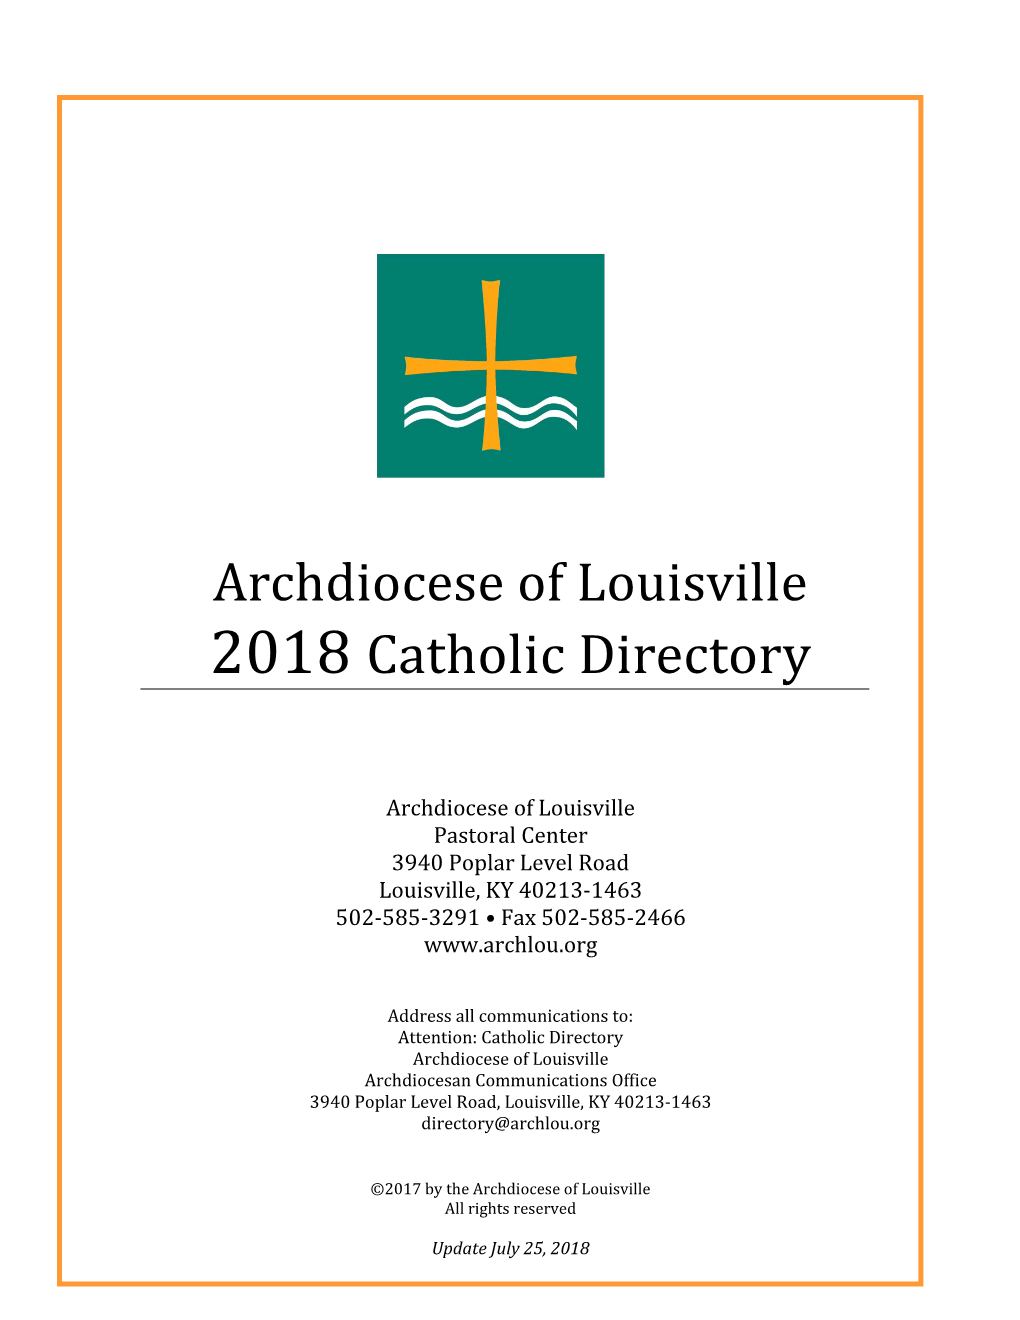 Archdiocese of Louisville 2018 Catholic Directory